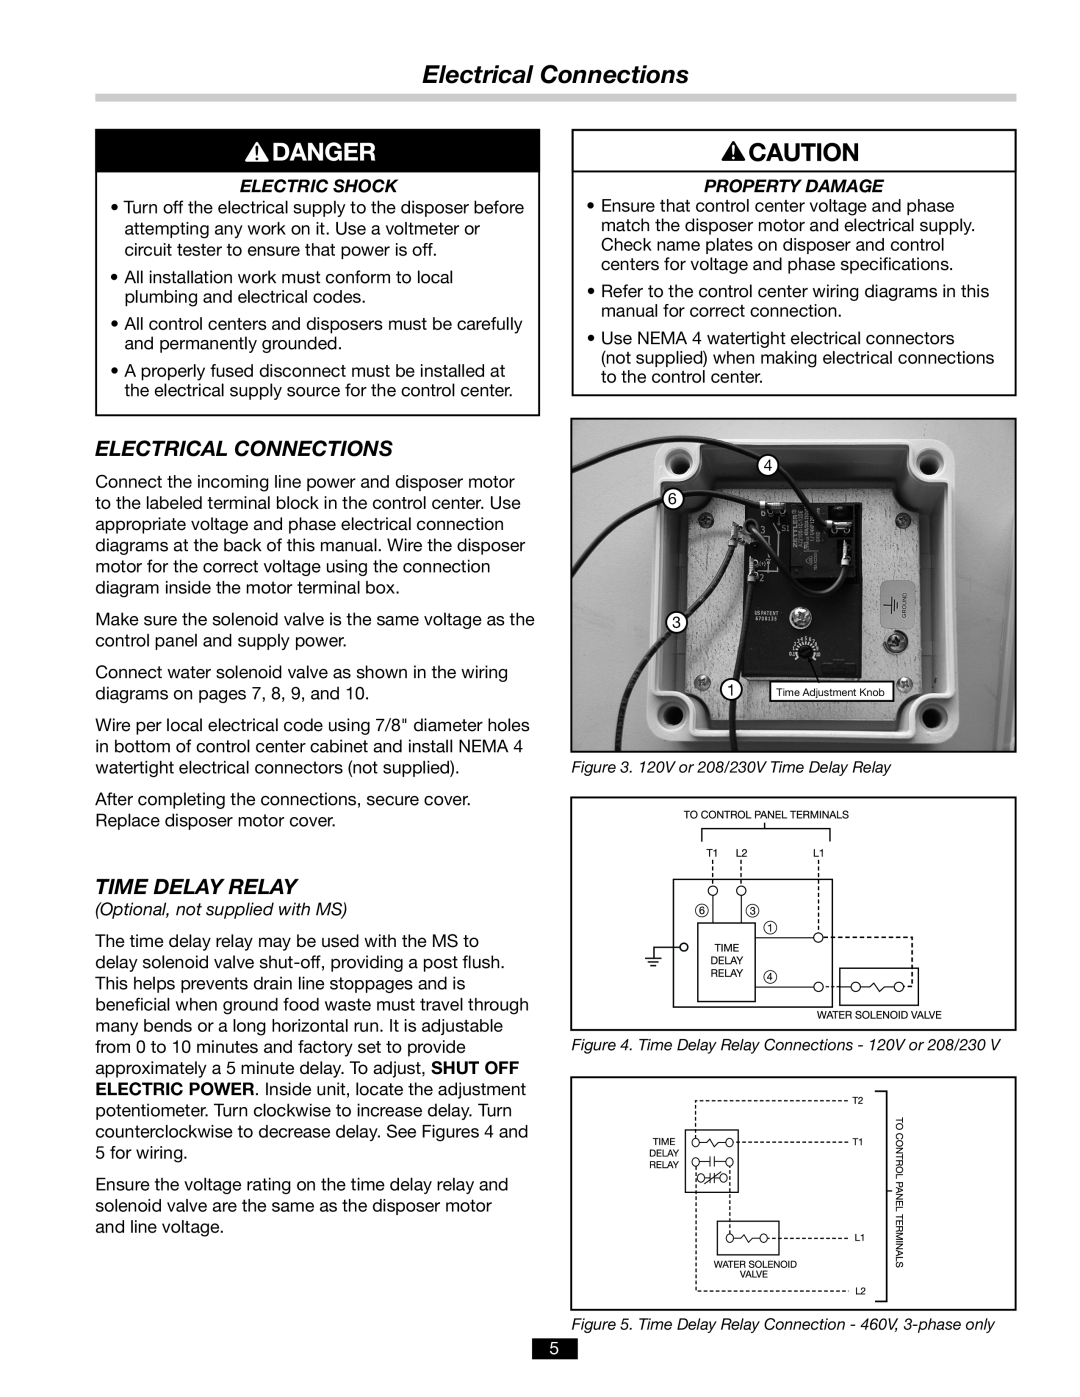 InSinkErator Electrical Connections, Time Delay Relay, Electric Shock, Optional, not supplied with MS, Property Damage 